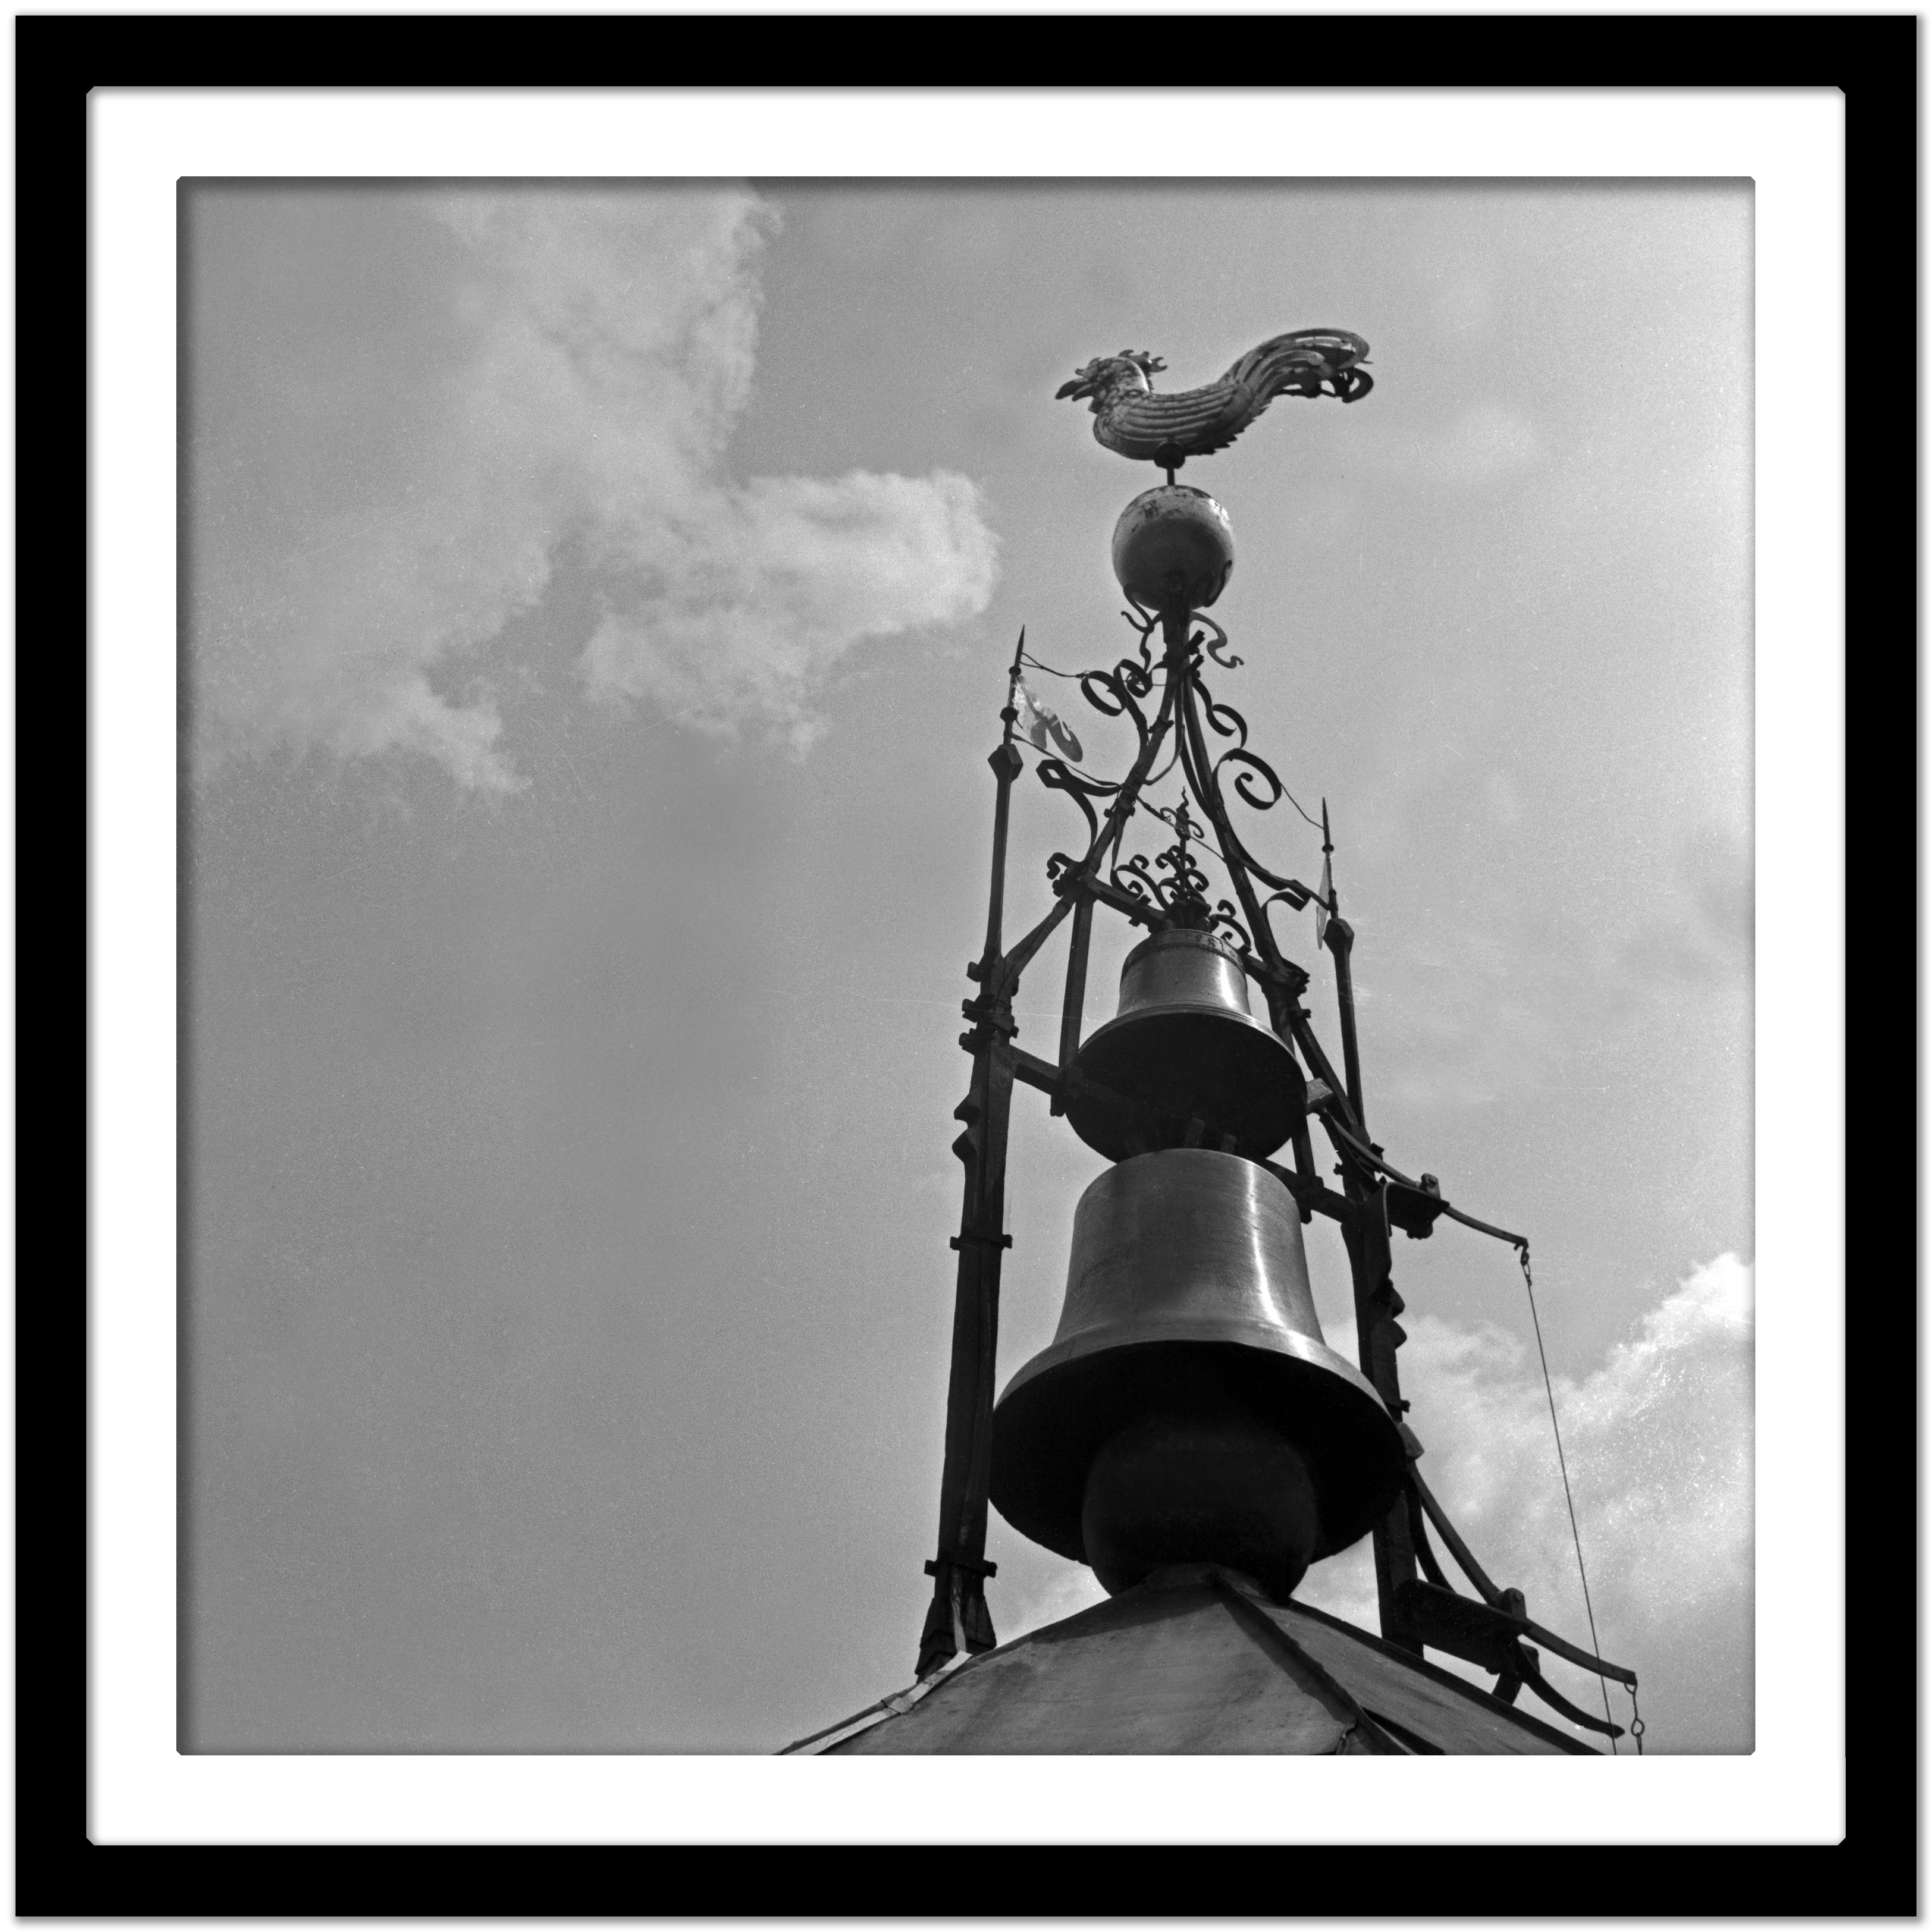 Weather vane bells at top of belfry Stuttgart, Germany 1935, Printed Later - Gray Black and White Photograph by Karl Heinrich Lämmel